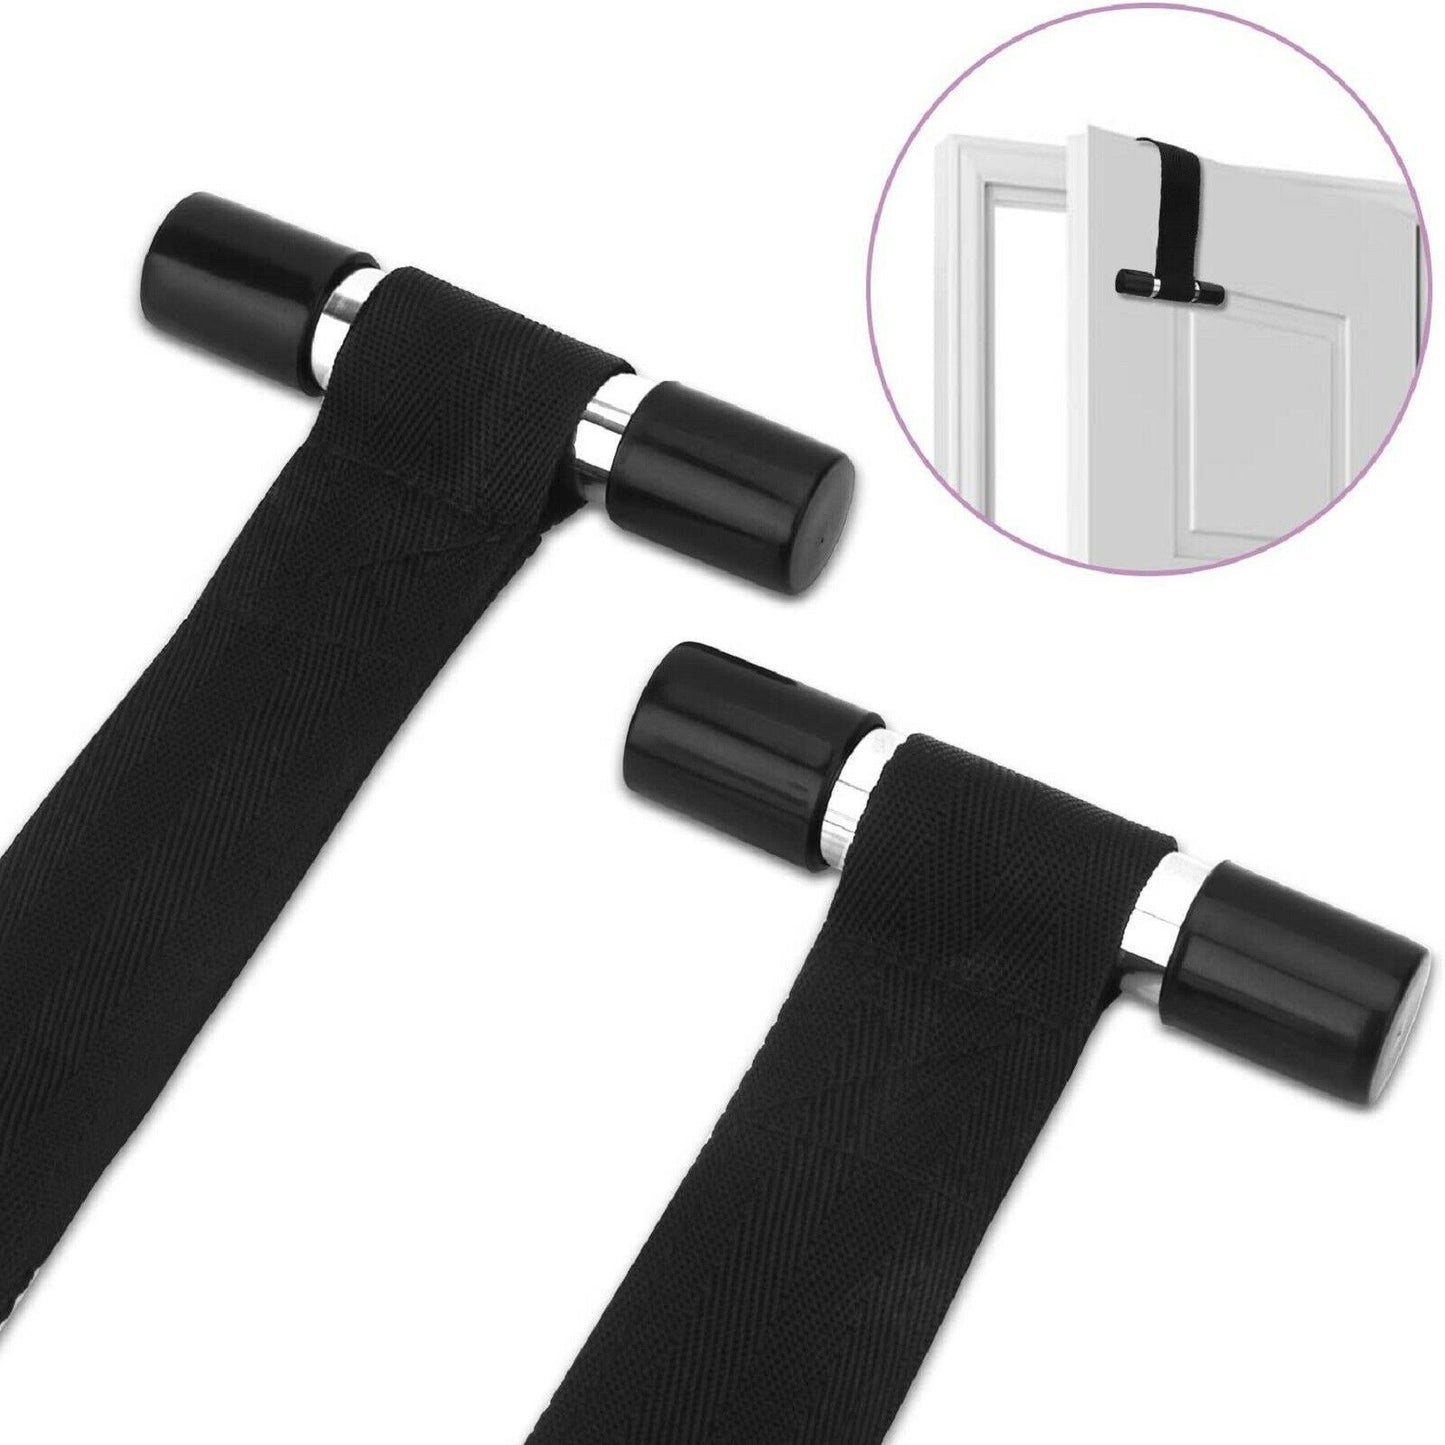 Door Adult Sex Swing Bondage Restraint Cuffs Hanging Strap Couples Stand Sex Toy